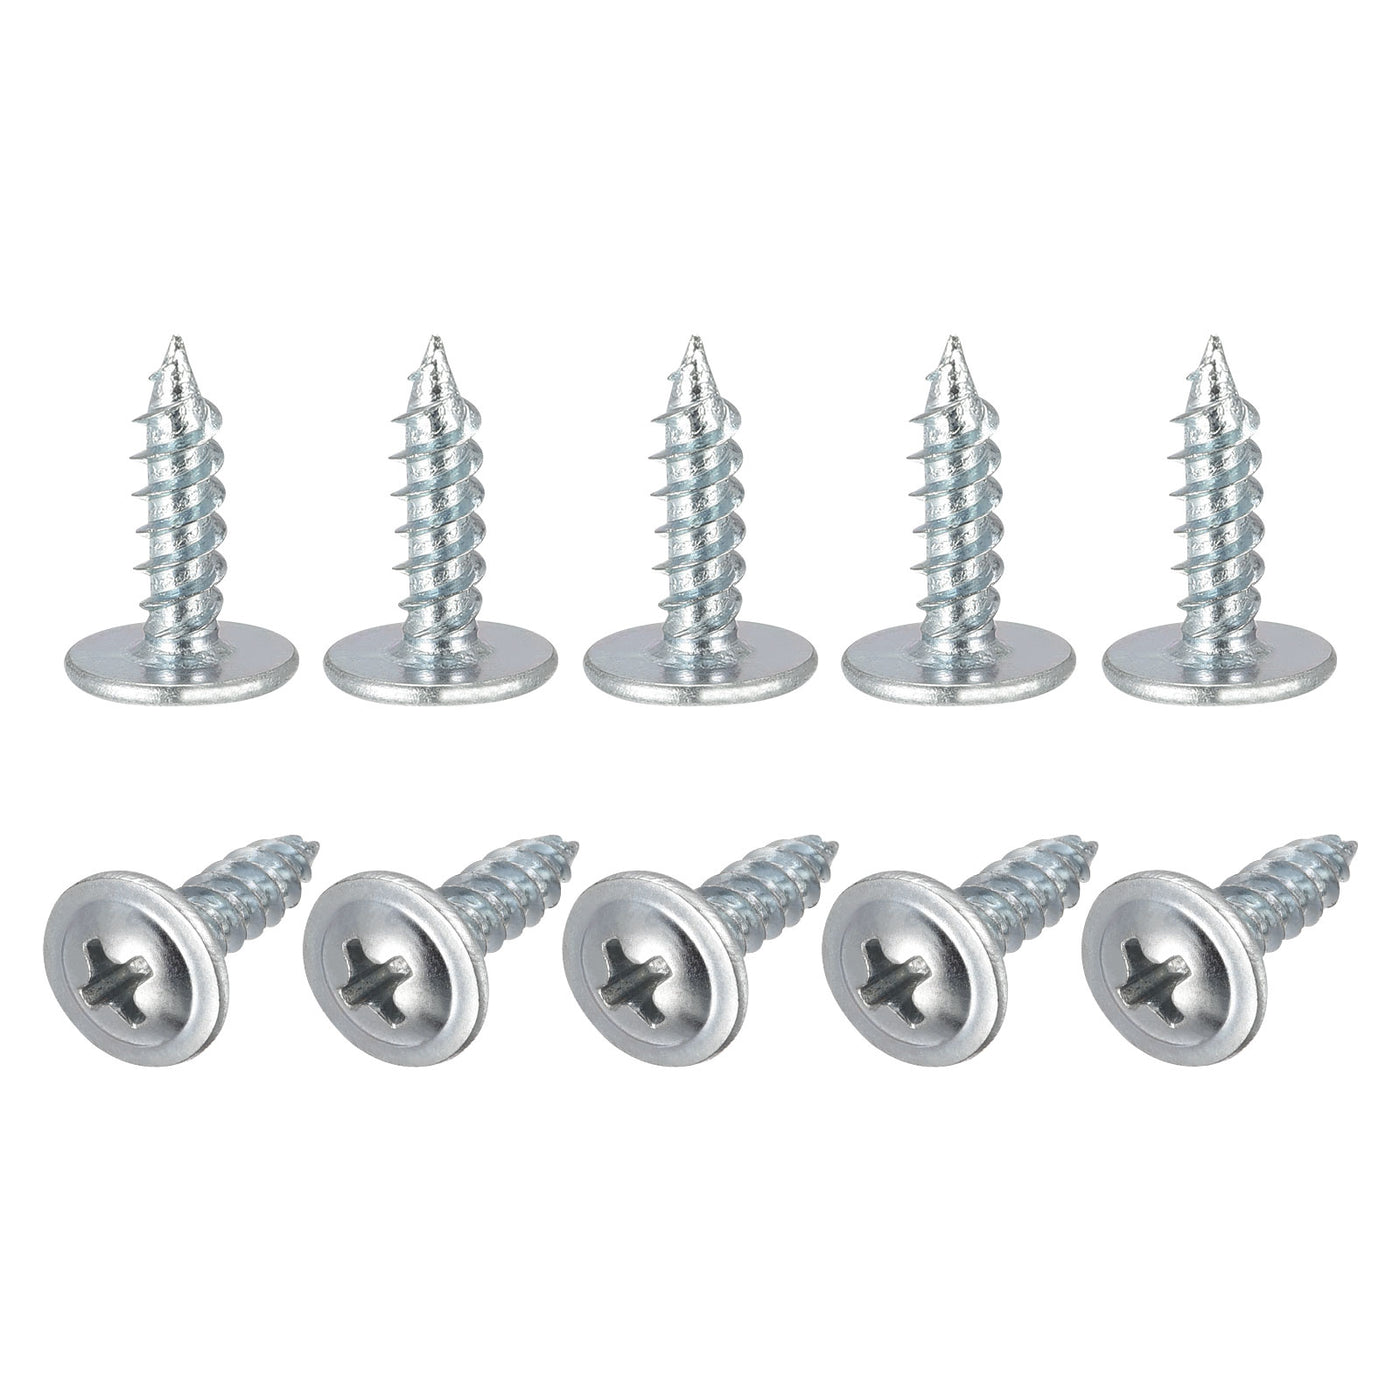 uxcell Uxcell Phillips Head Self Tapping Screws, #8 x 1/2" Carbon Steel Wood Sheet Metal Screw 100pcs